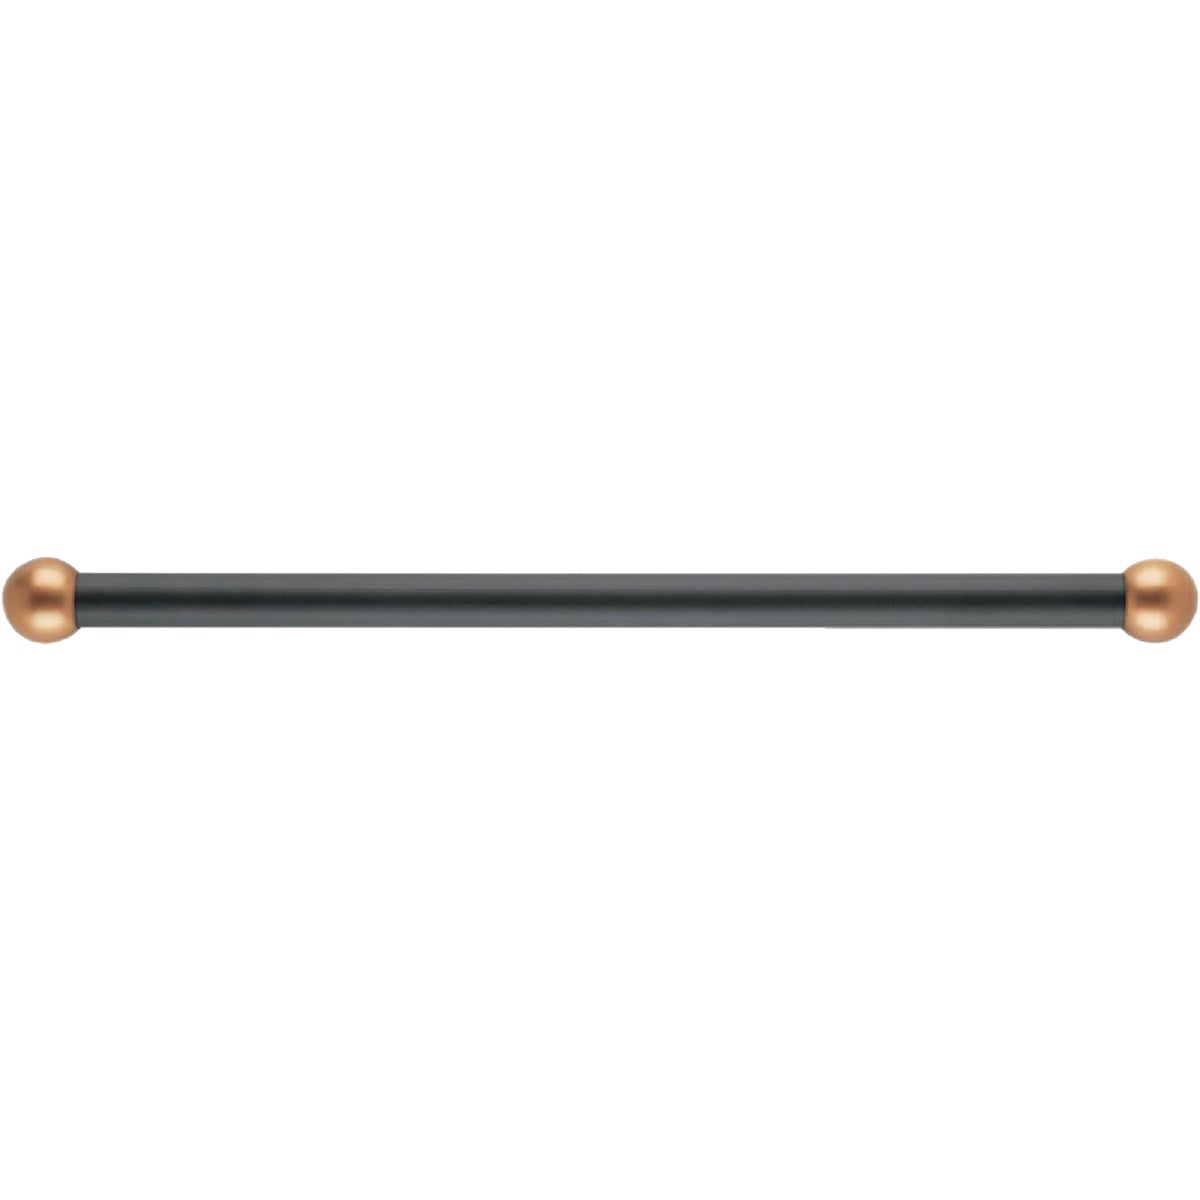 Item 552216, Black steel lamp post crossarm featuring brass-colored polycarbonate 